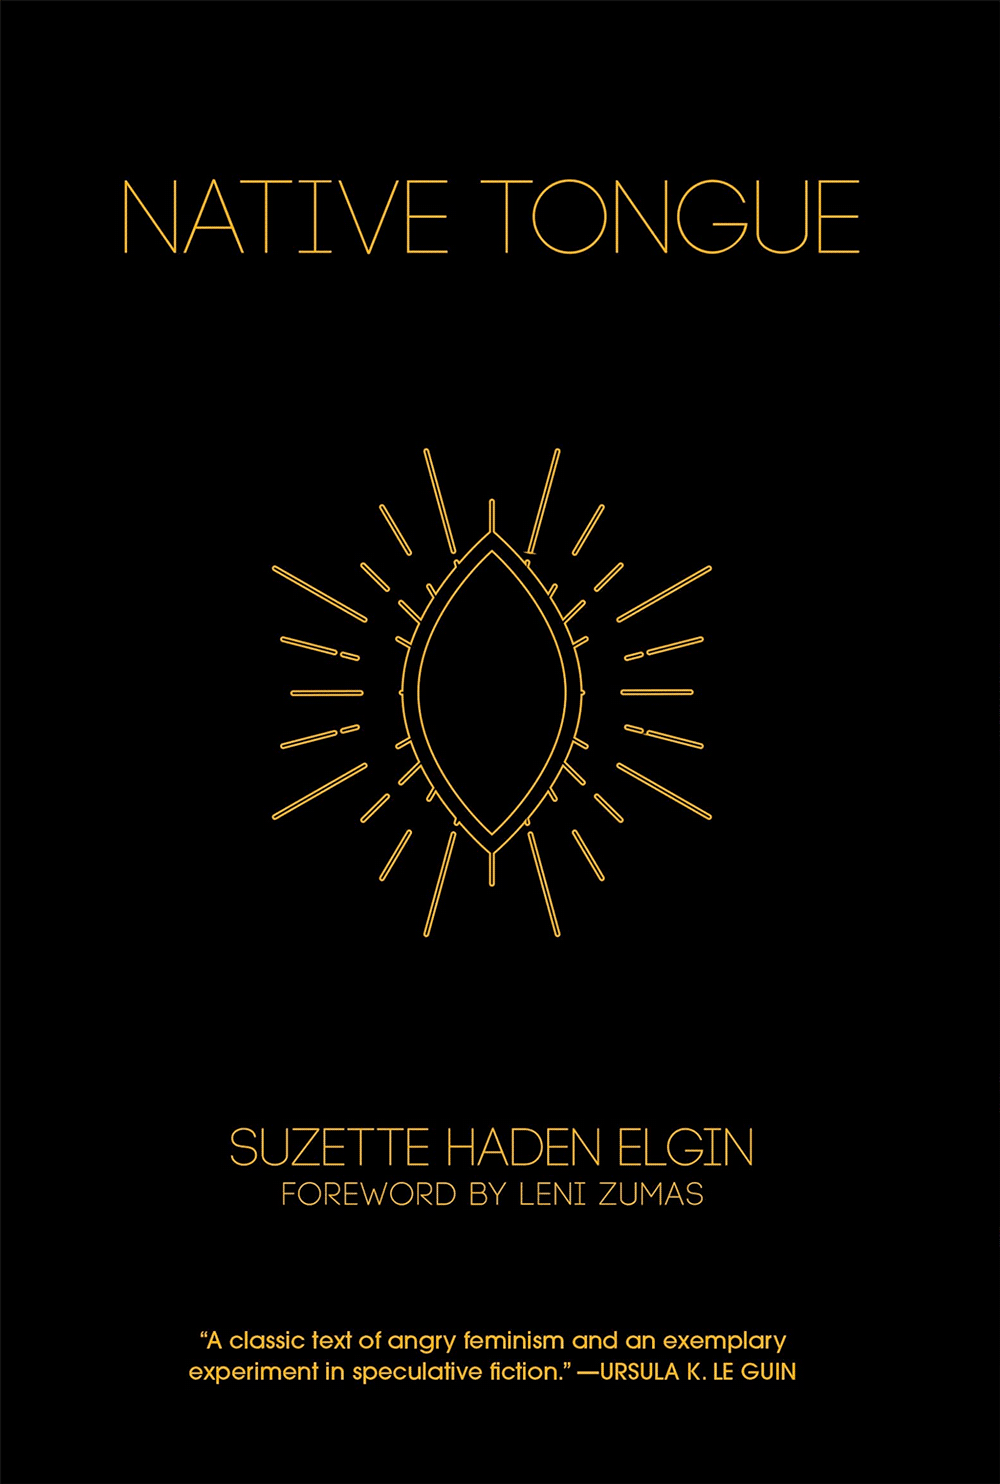 Cover of the book 'Native Tongue' by Suzette Haden Elgin, with fine-lined yellow text on a black background and a vaginal-looking geometric pattern at the center.